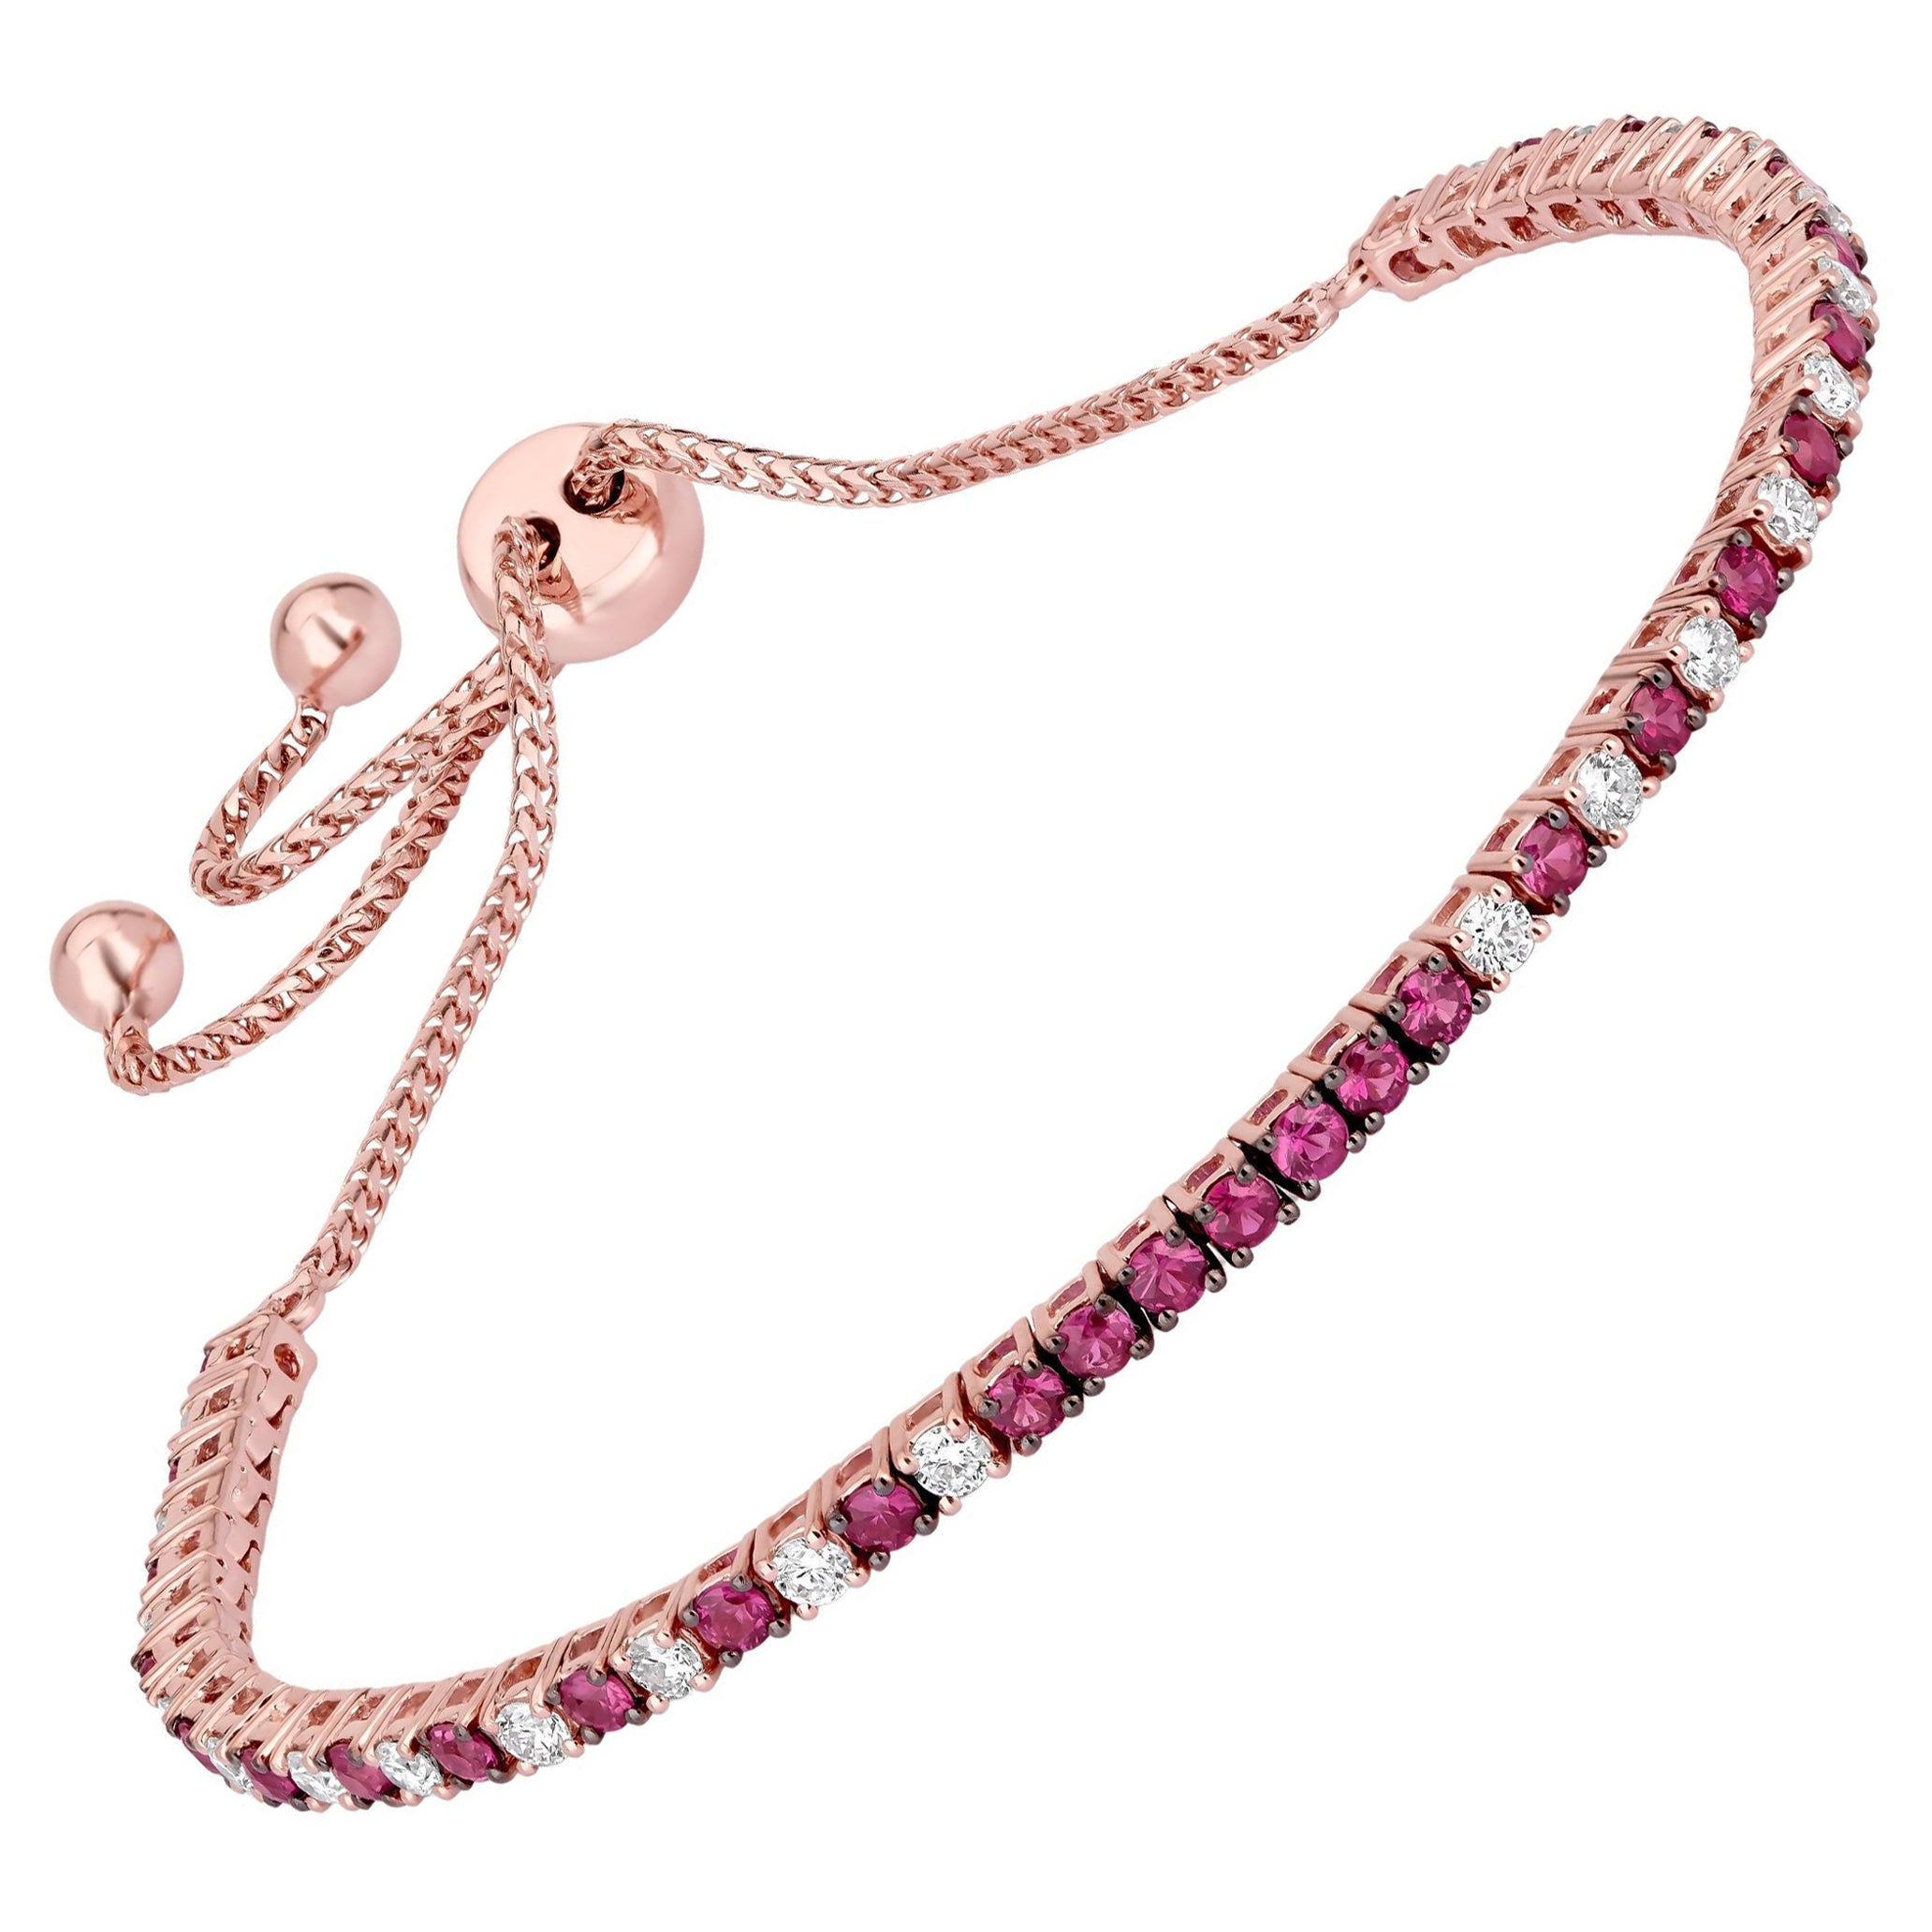 Gemistry 1.69cttw. Ruby and Diamond Tennis Bracelet in 18k Rose Gold For Sale